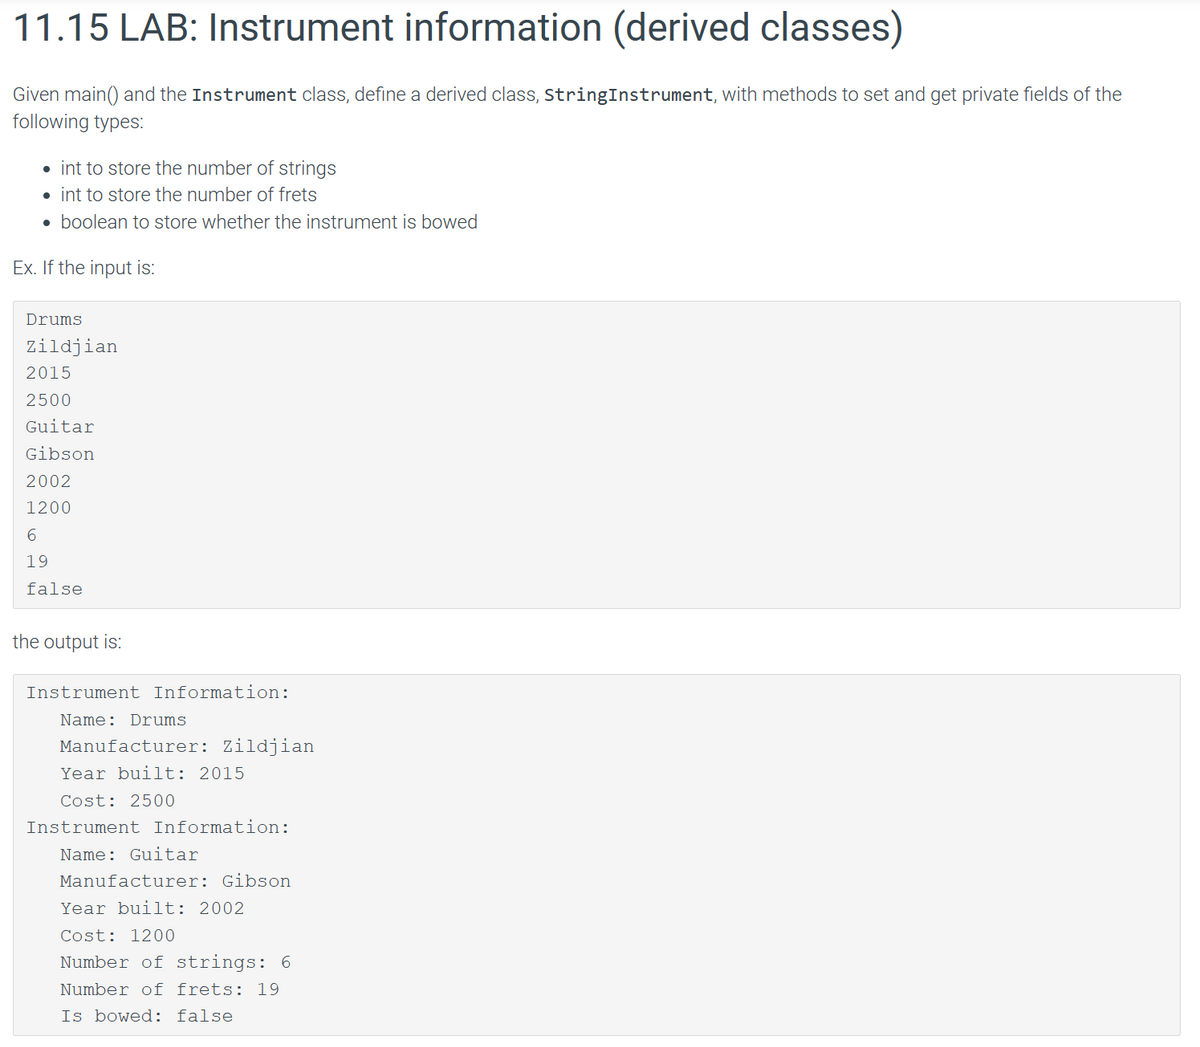 11.15 LAB: Instrument information (derived classes)
Given main() and the Instrument class, define a derived class, StringInstrument, with methods to set and get private fields of the
following types:
• int to store the number of strings
• int to store the number of frets
• boolean to store whether the instrument is bowed
Ex. If the input is:
Drums
Zildjian
2015
2500
Guitar
Gibson
2002
1200
6
19
false
the output is:
Instrument Information:
Name: Drums
Manufacturer: Zildjian
Year built: 2015
Cost: 2500
Instrument Information:
Name: Guitar
Manufacturer: Gibson
Year built: 2002
Cost: 1200
Number of strings: 6
Number of frets: 19
Is bowed: false